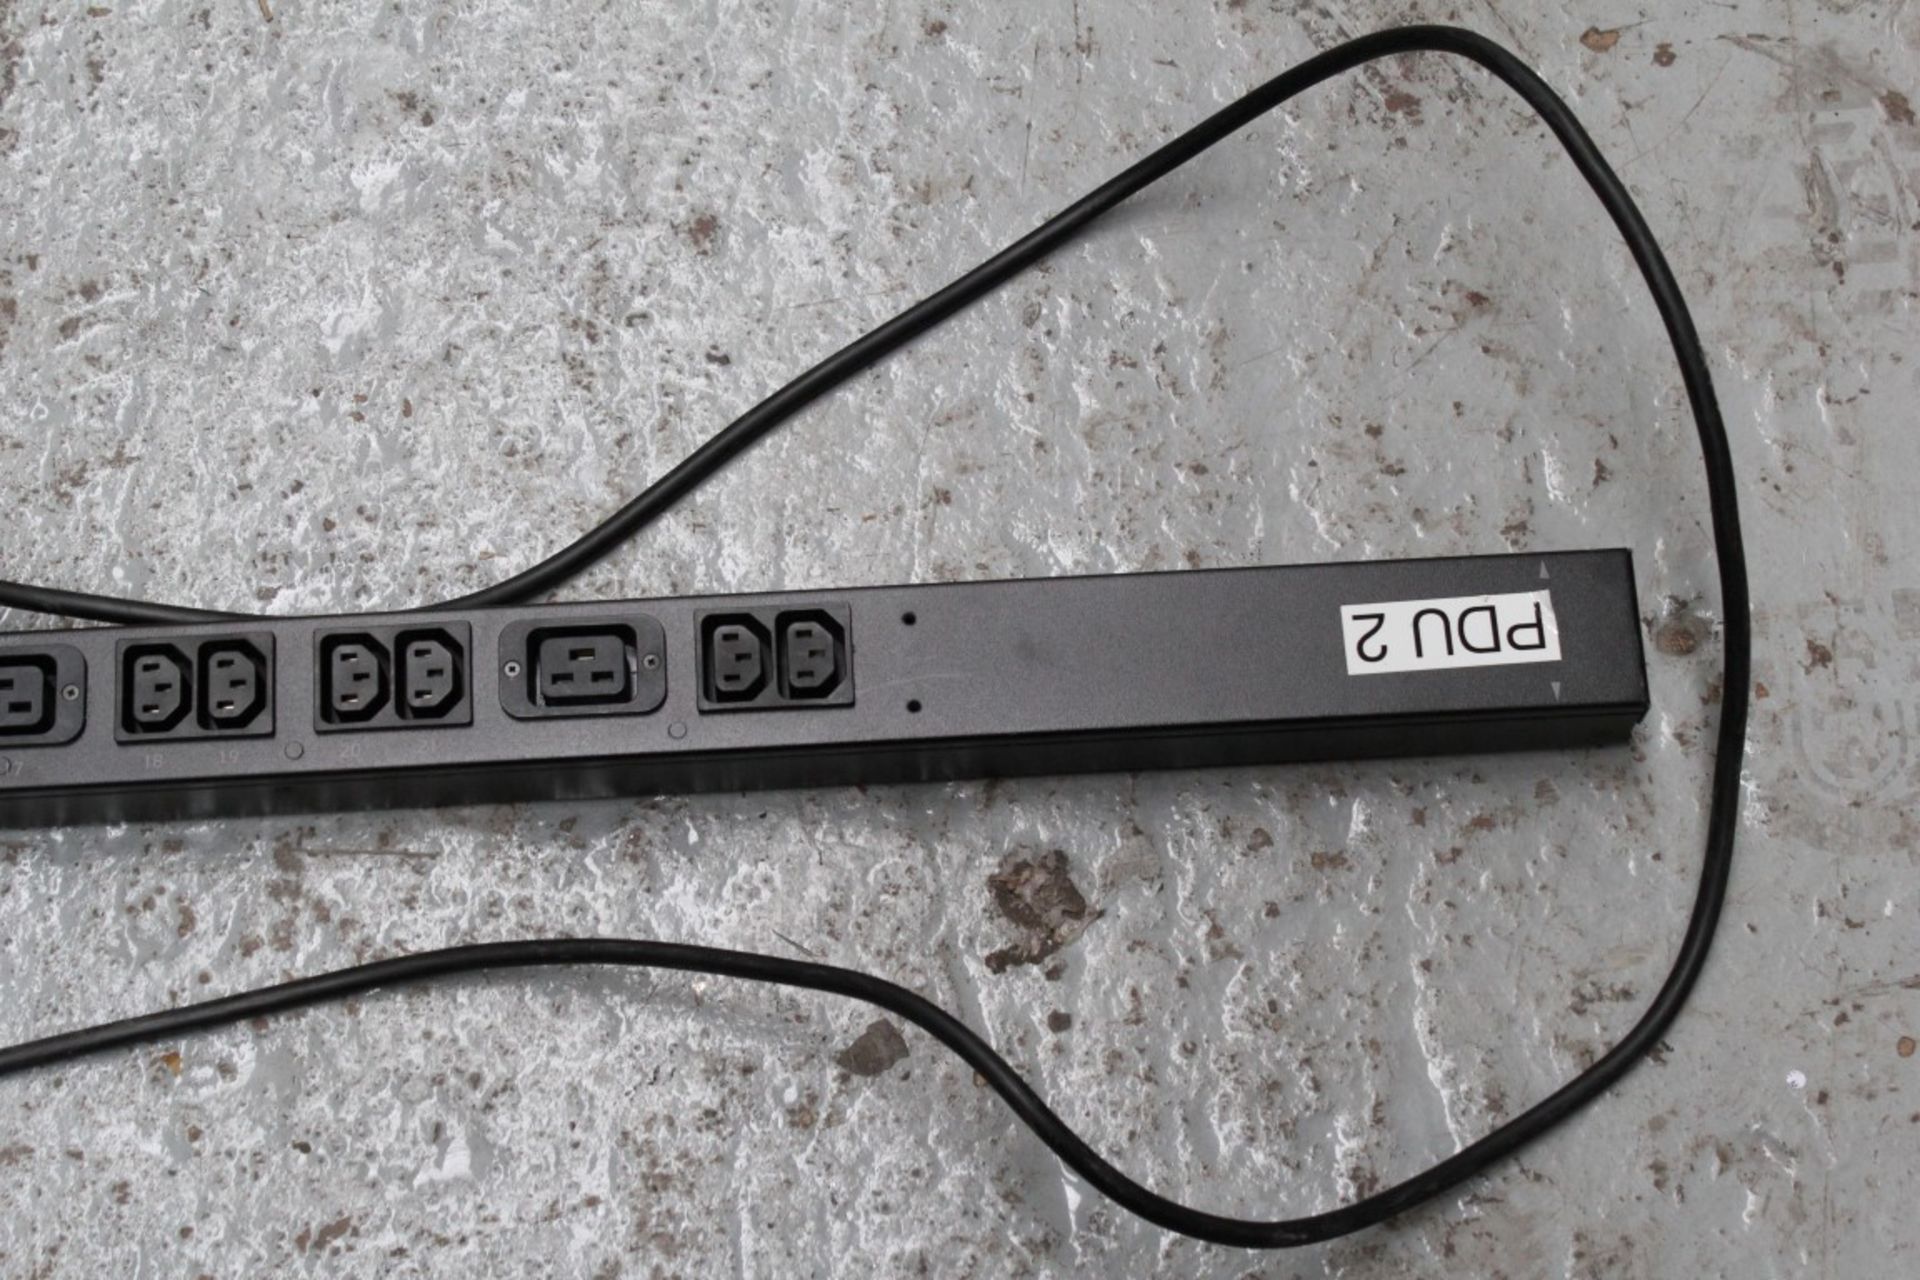 1 x APC Metered Rack PDU - Model AP7852 - 230V 16A - Features 24 Output Connectors - CL106 - Removed - Image 3 of 4